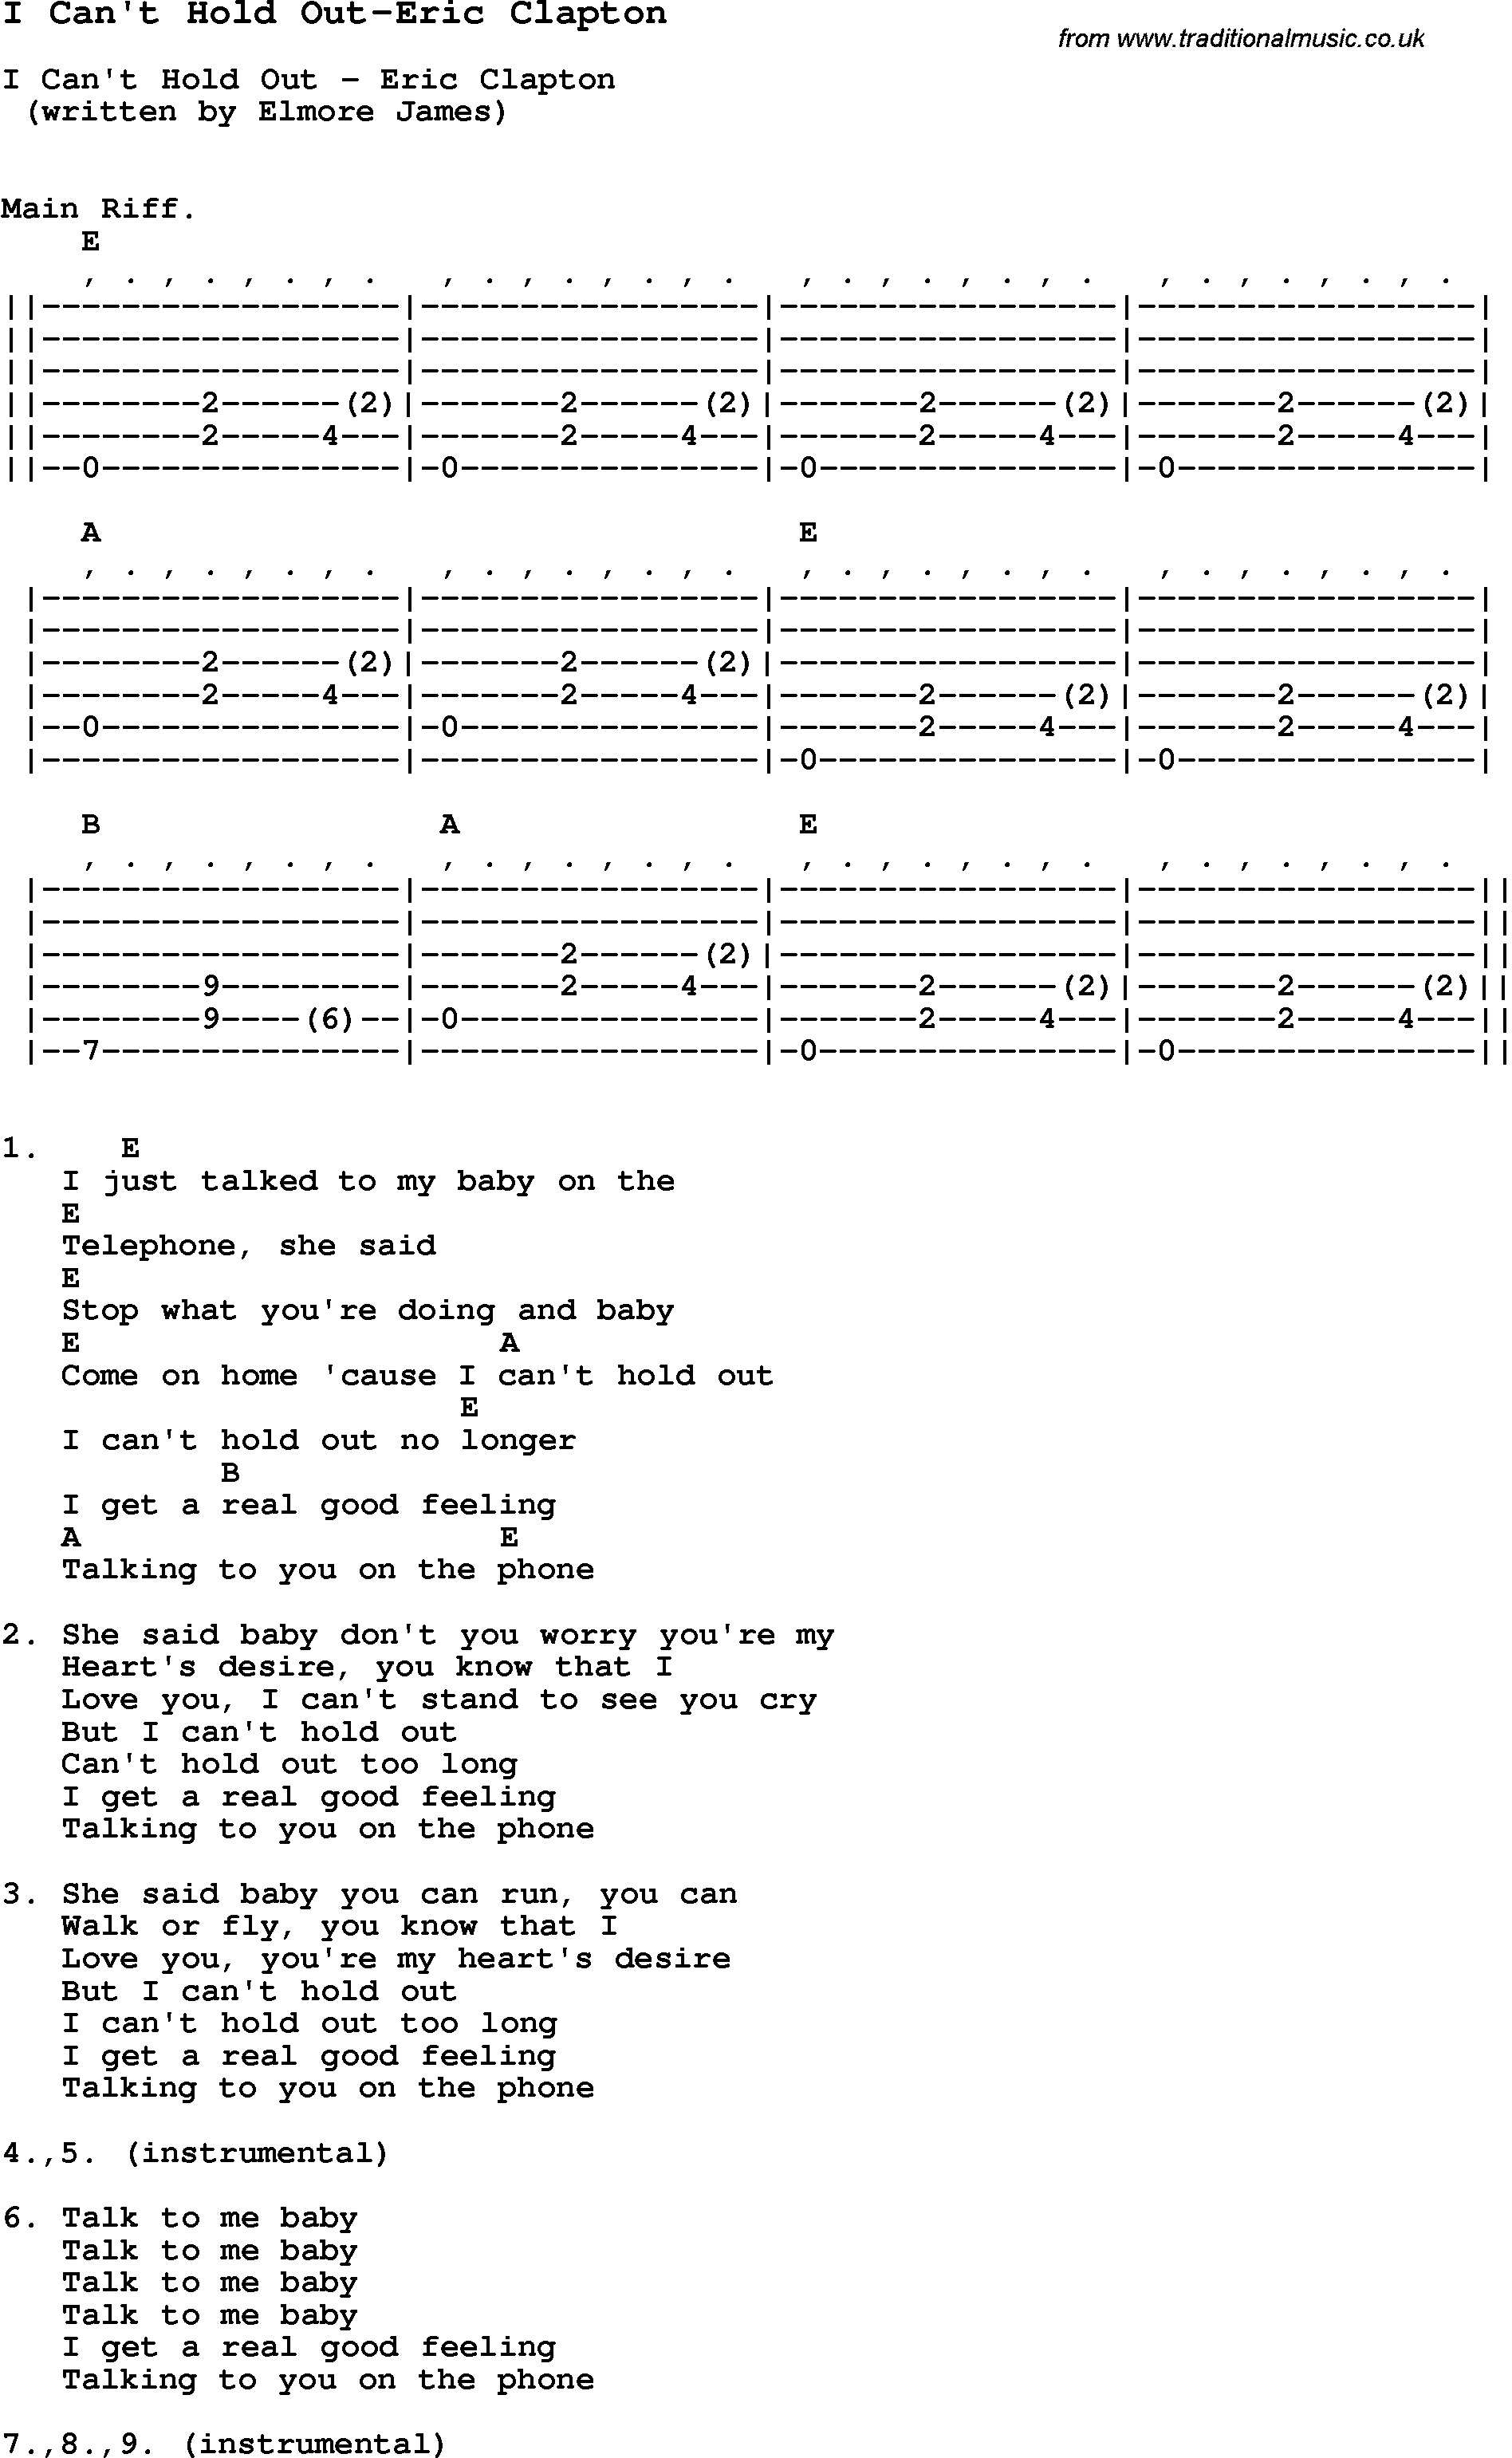 Blues Guitar Song, lyrics, chords, tablature, playing hints for I Can't Hold Out-Eric Clapton